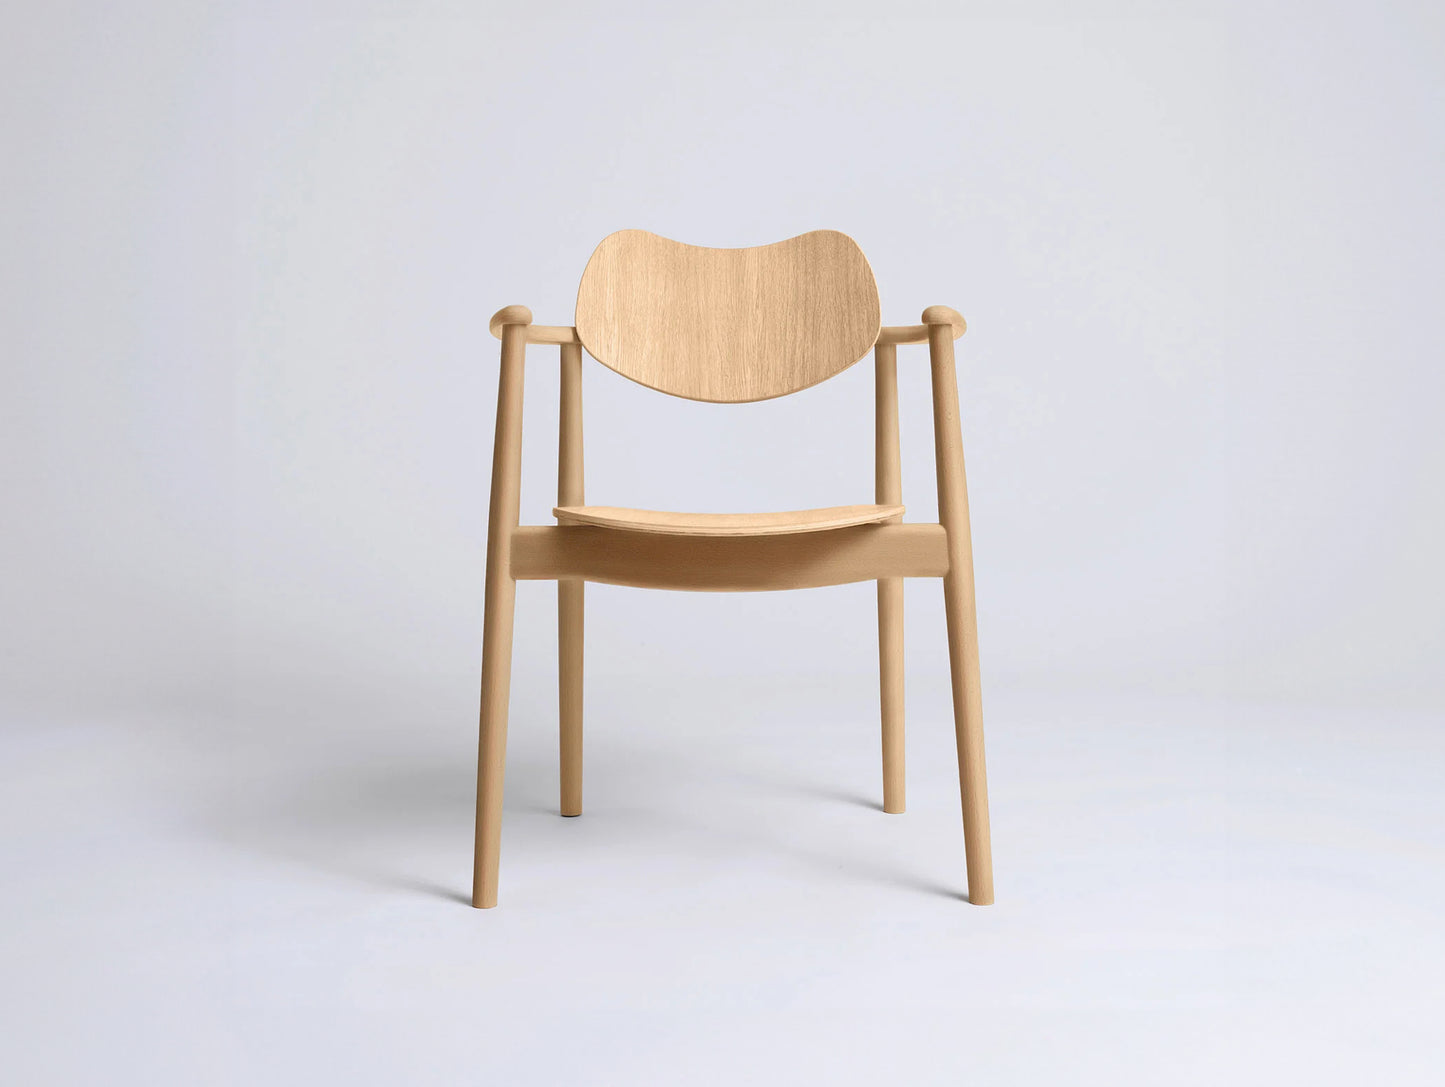 Regatta Chair by Ro Collection - Oiled beech